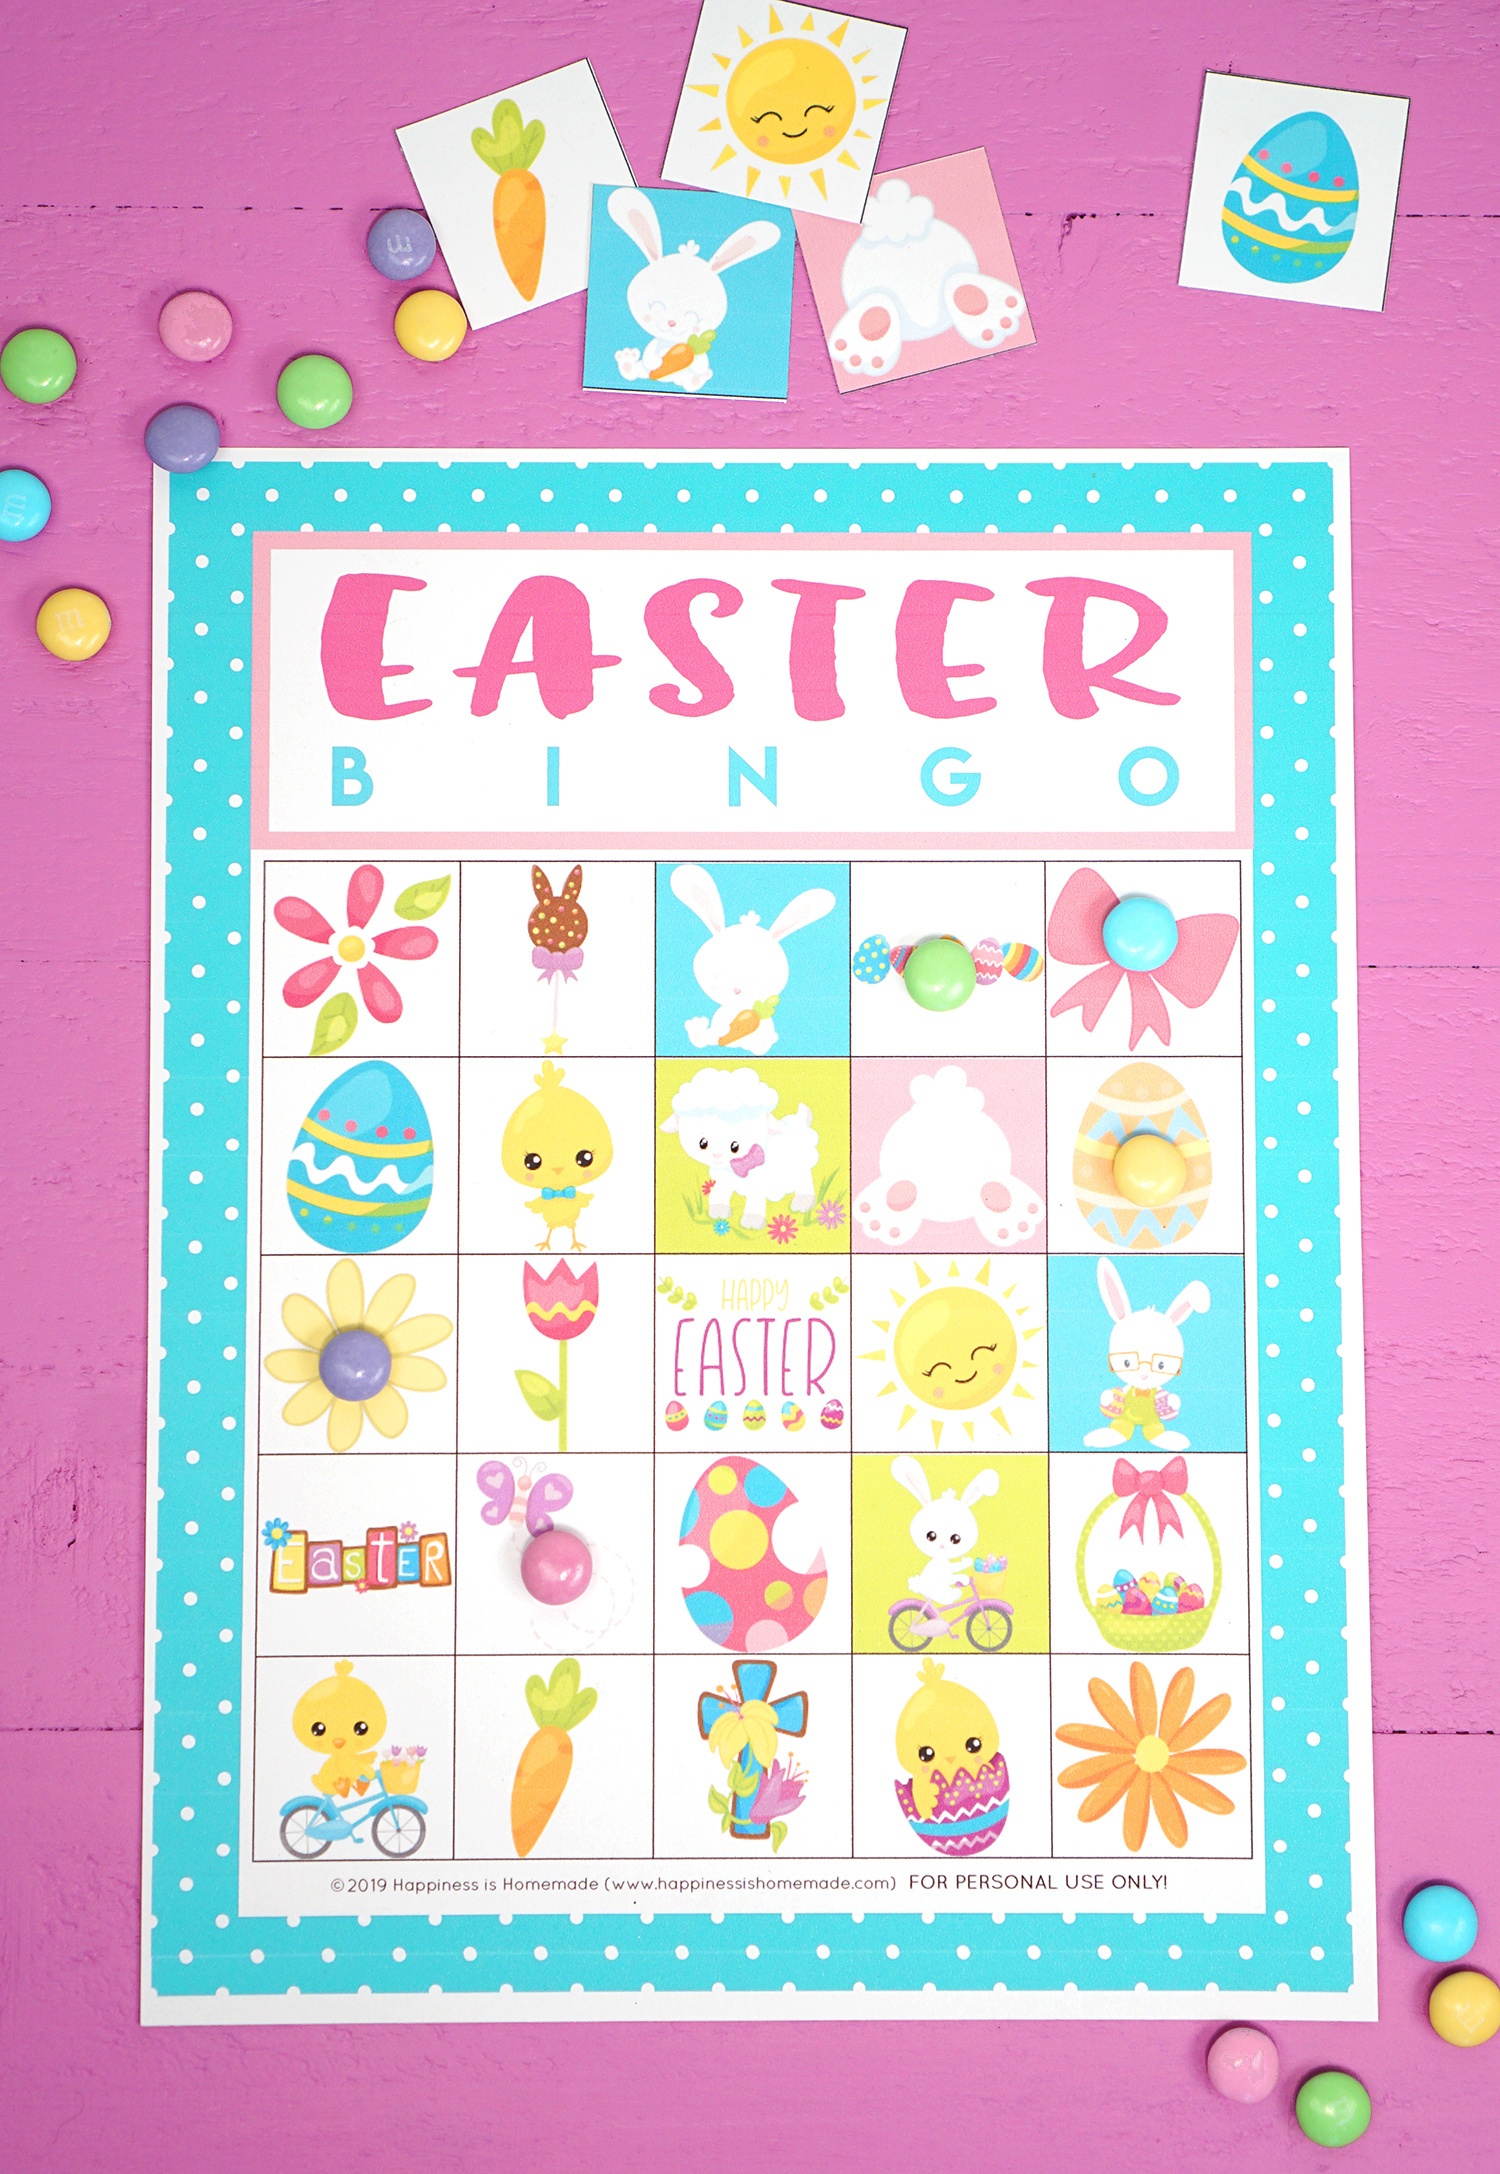 30+ Totally Free Easter Printables - Happiness Is Homemade - Free Printable Easter Images